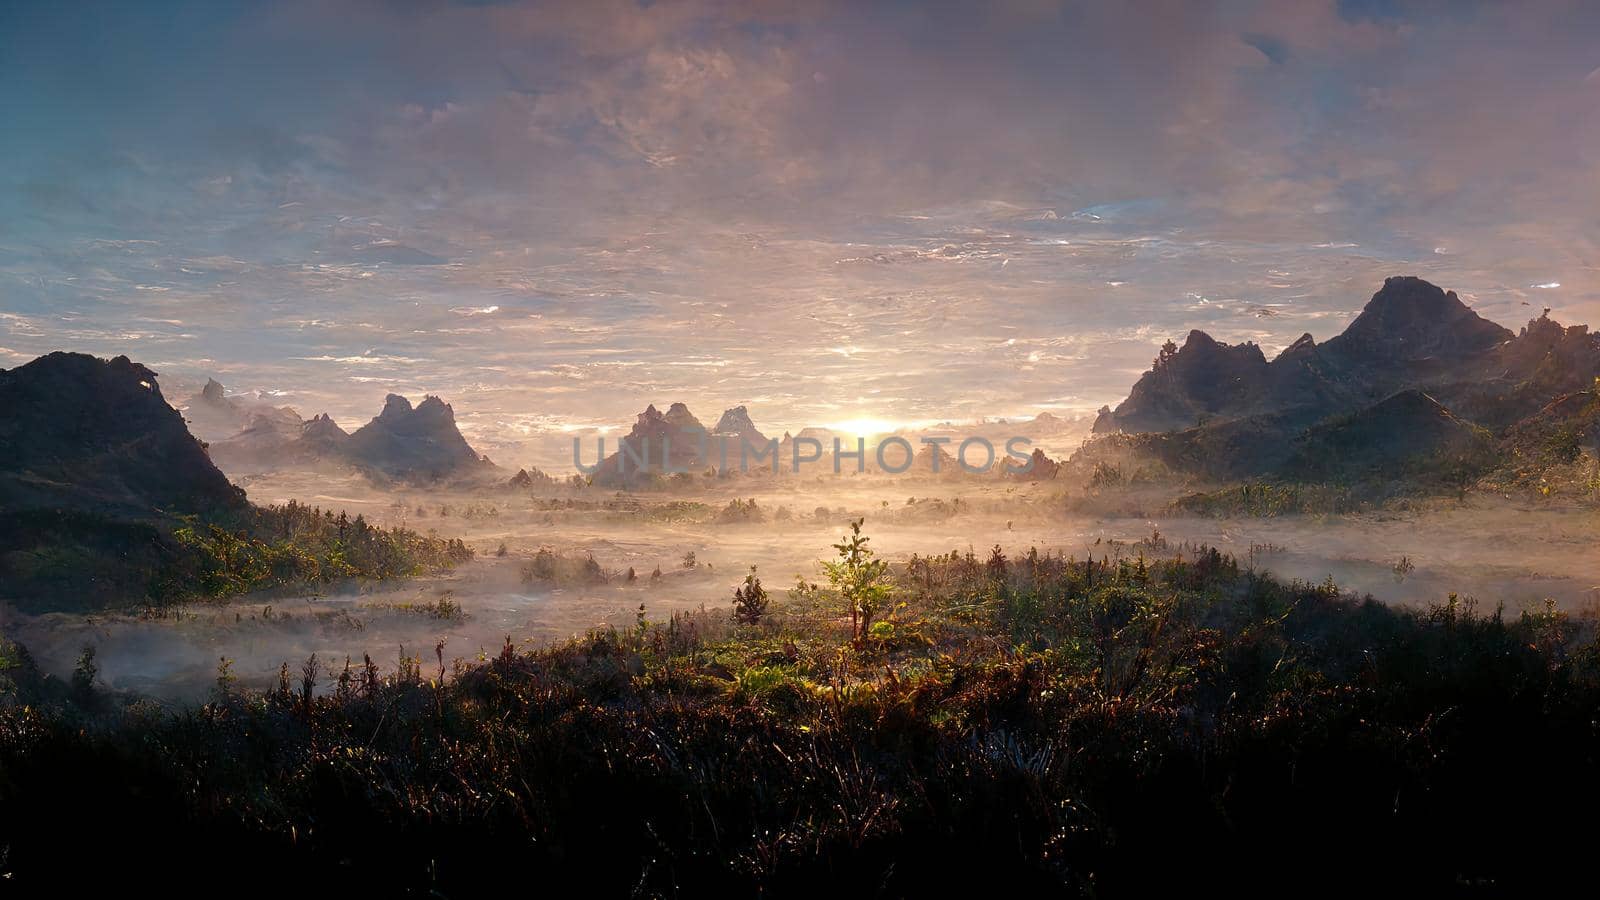 Mountain plain at dawn with fog between trees and high hills and mountains in the background.